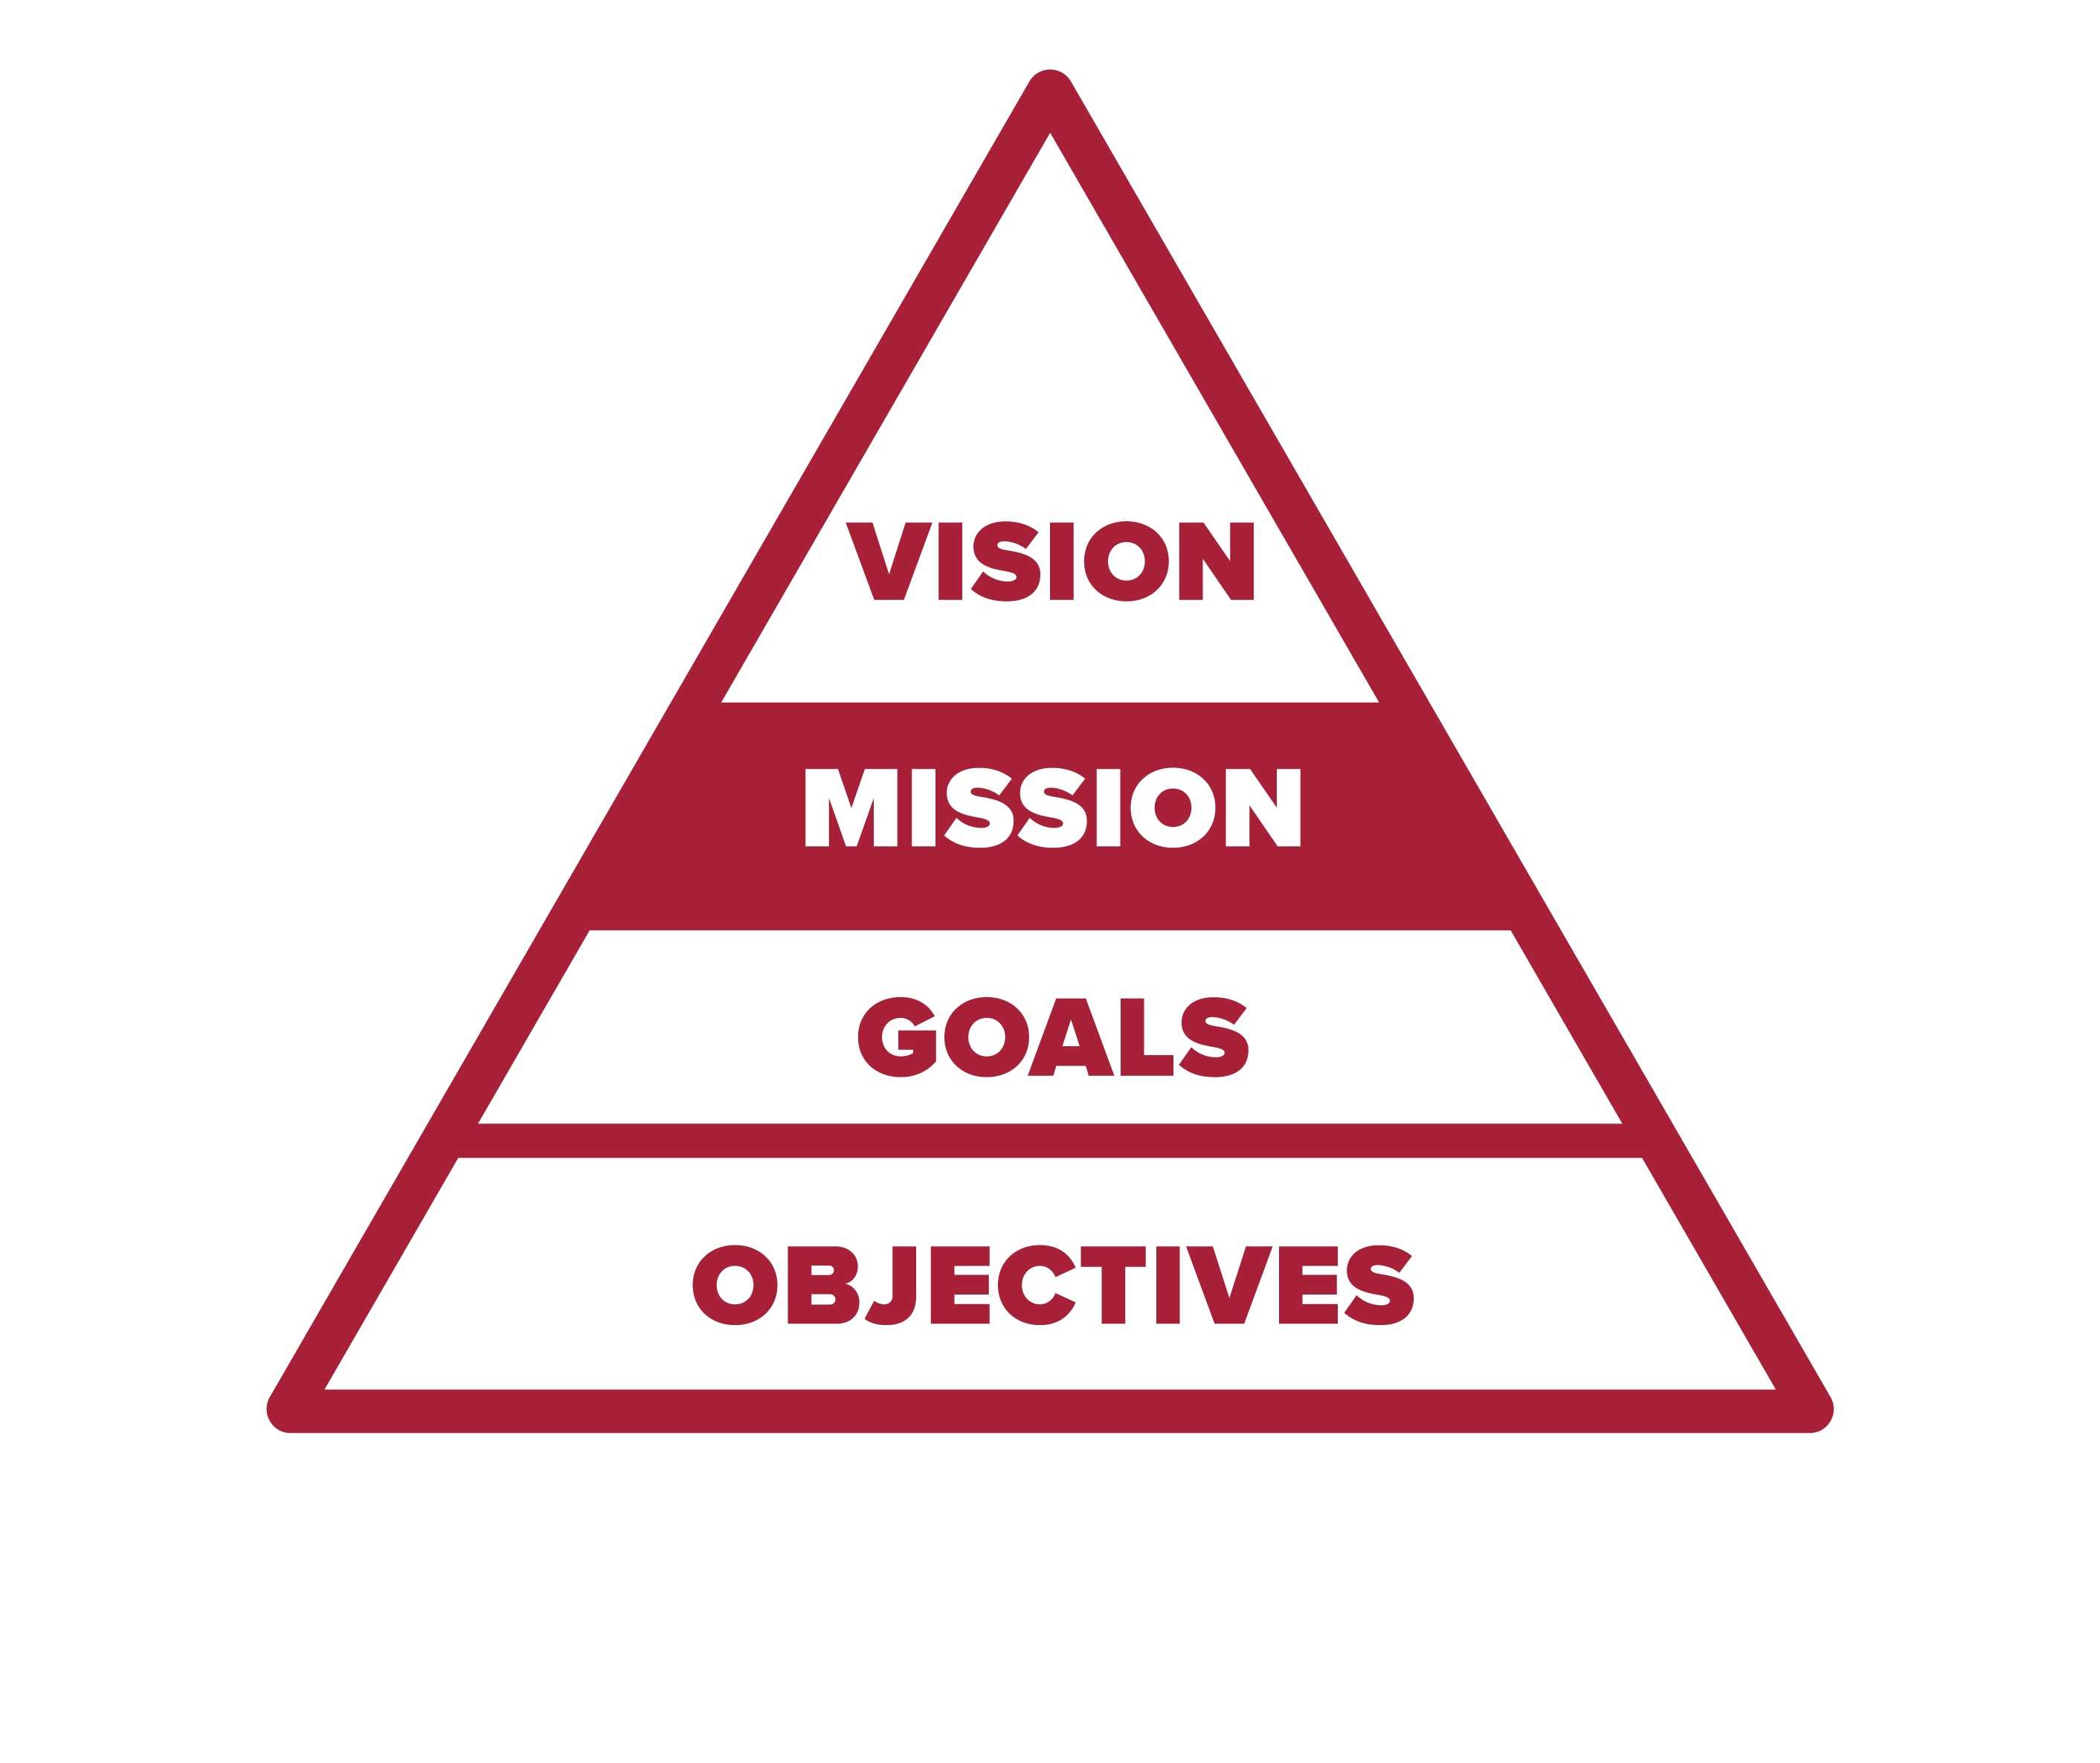 Image of mission statement icon